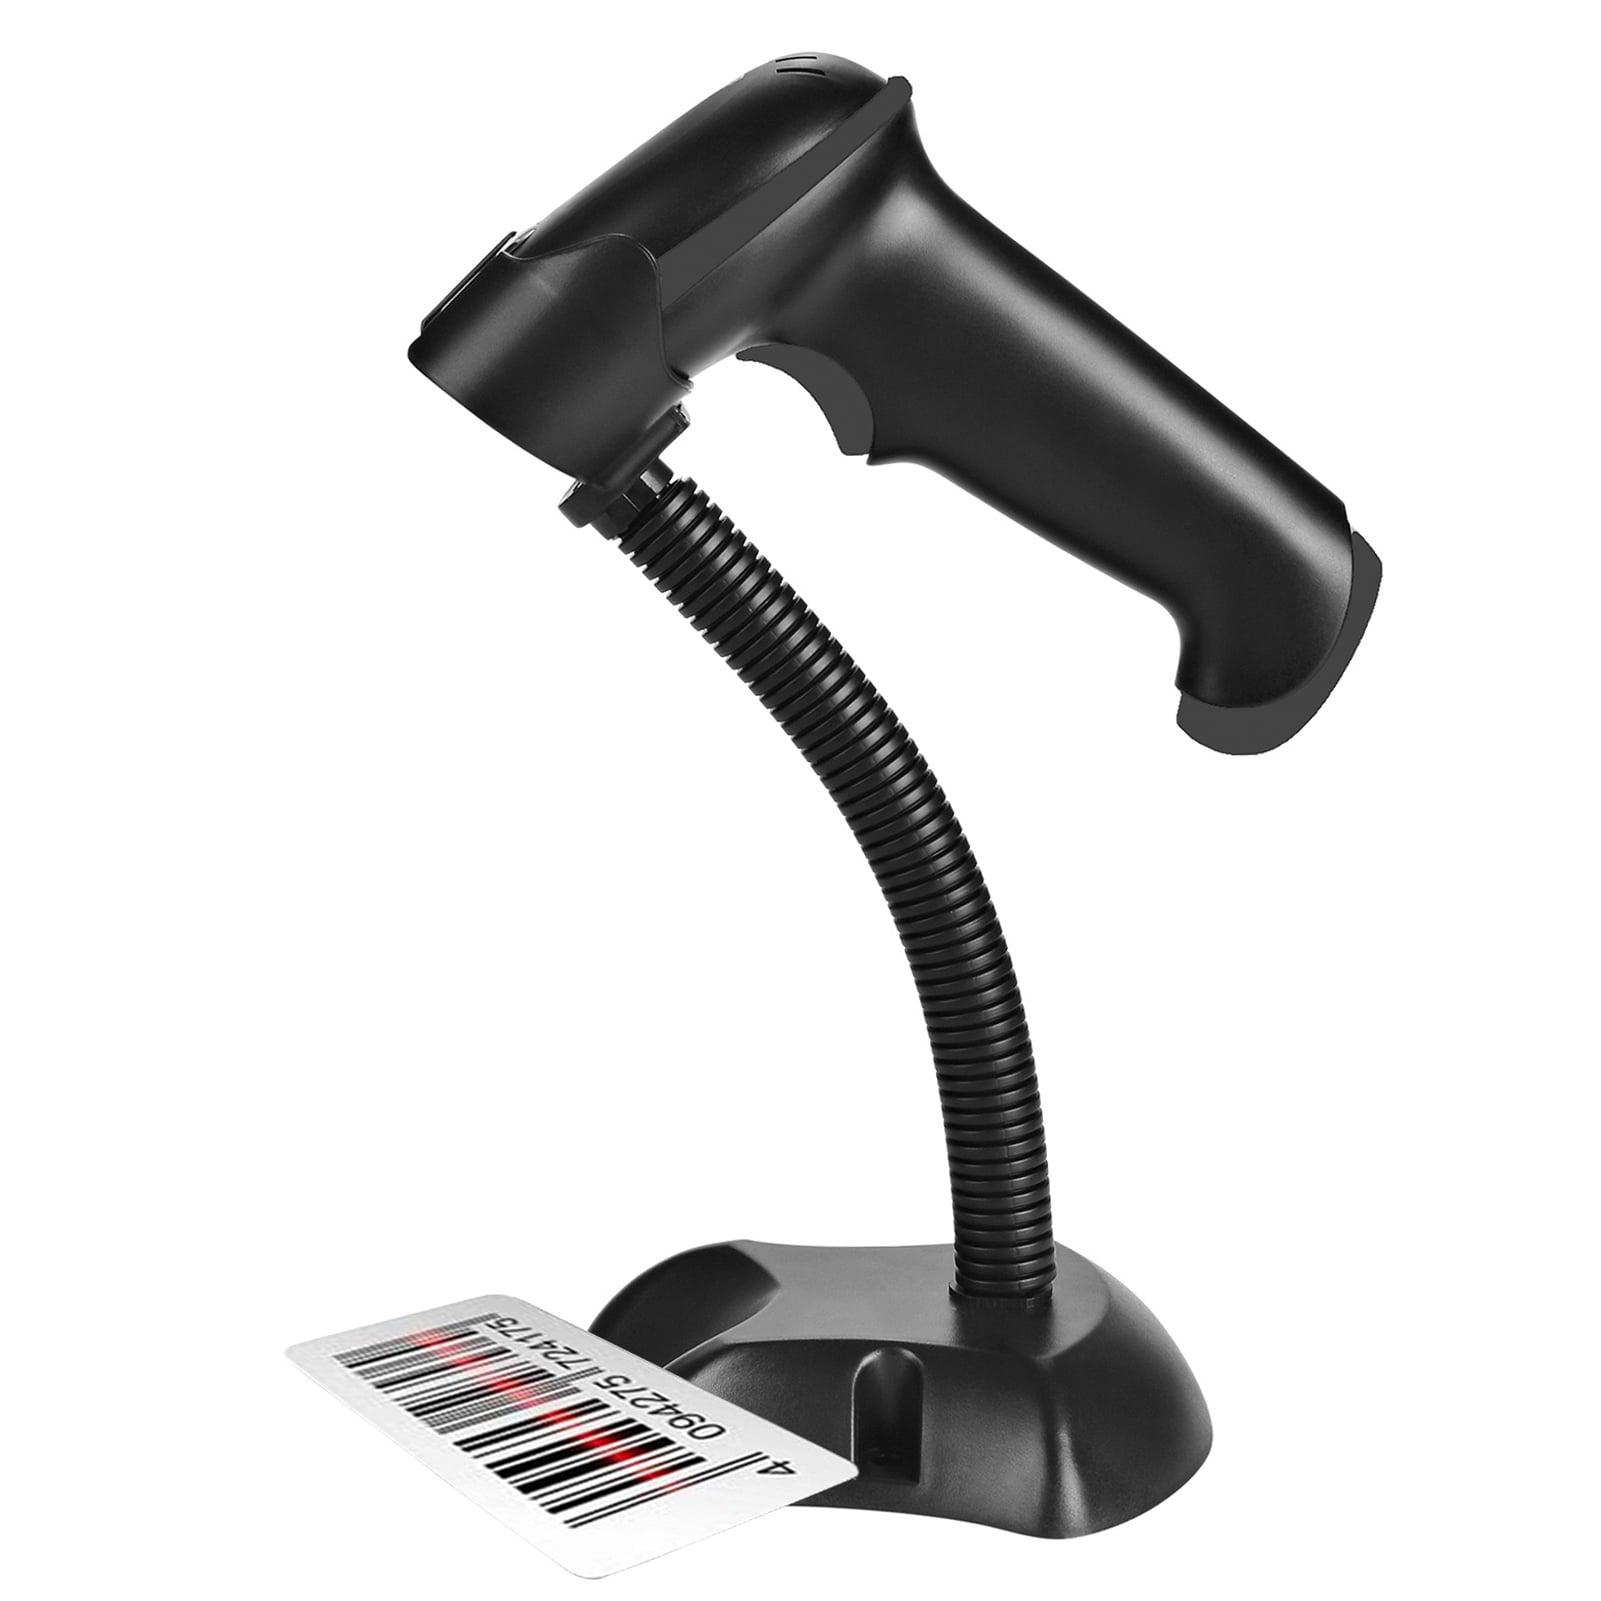 wired handheld bar code scanner with adjustable stand THZY barcode scanner 